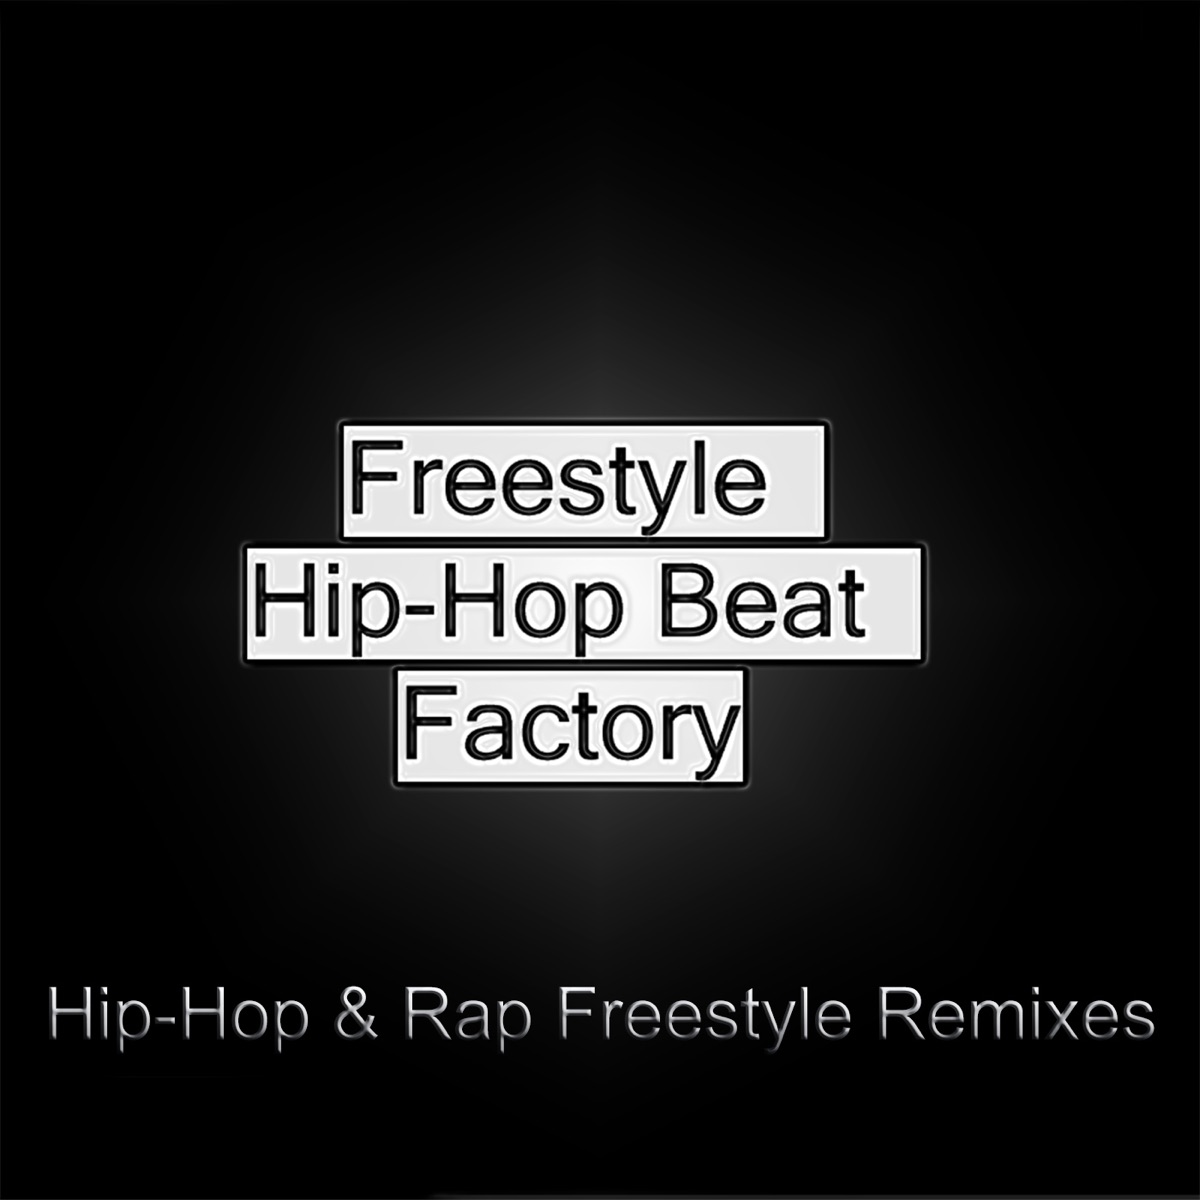 Instrumental Hip Hop and Rap Freestyle Beat Remixes by Freestyle Hip-Hop  Beat Factory on Apple Music